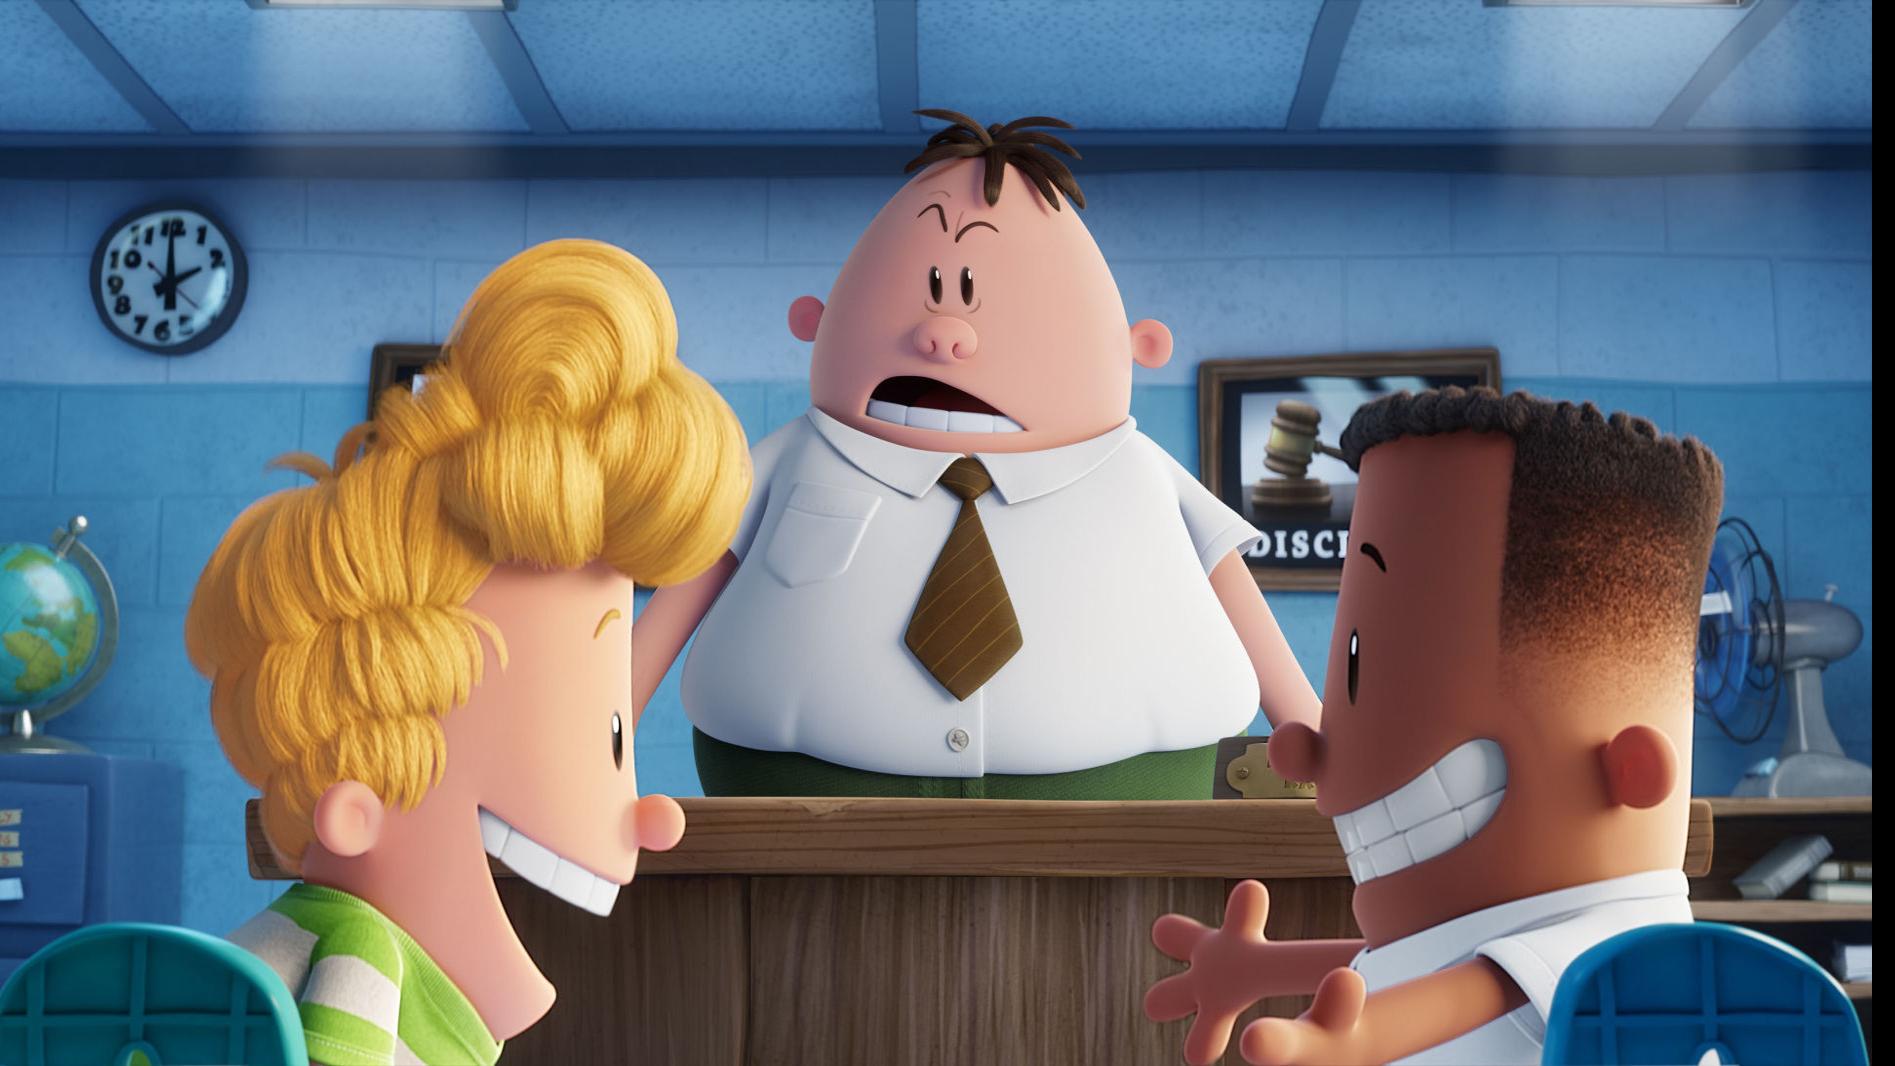 Movie review: Humor in 'Captain Underpants' very elementary, Movies